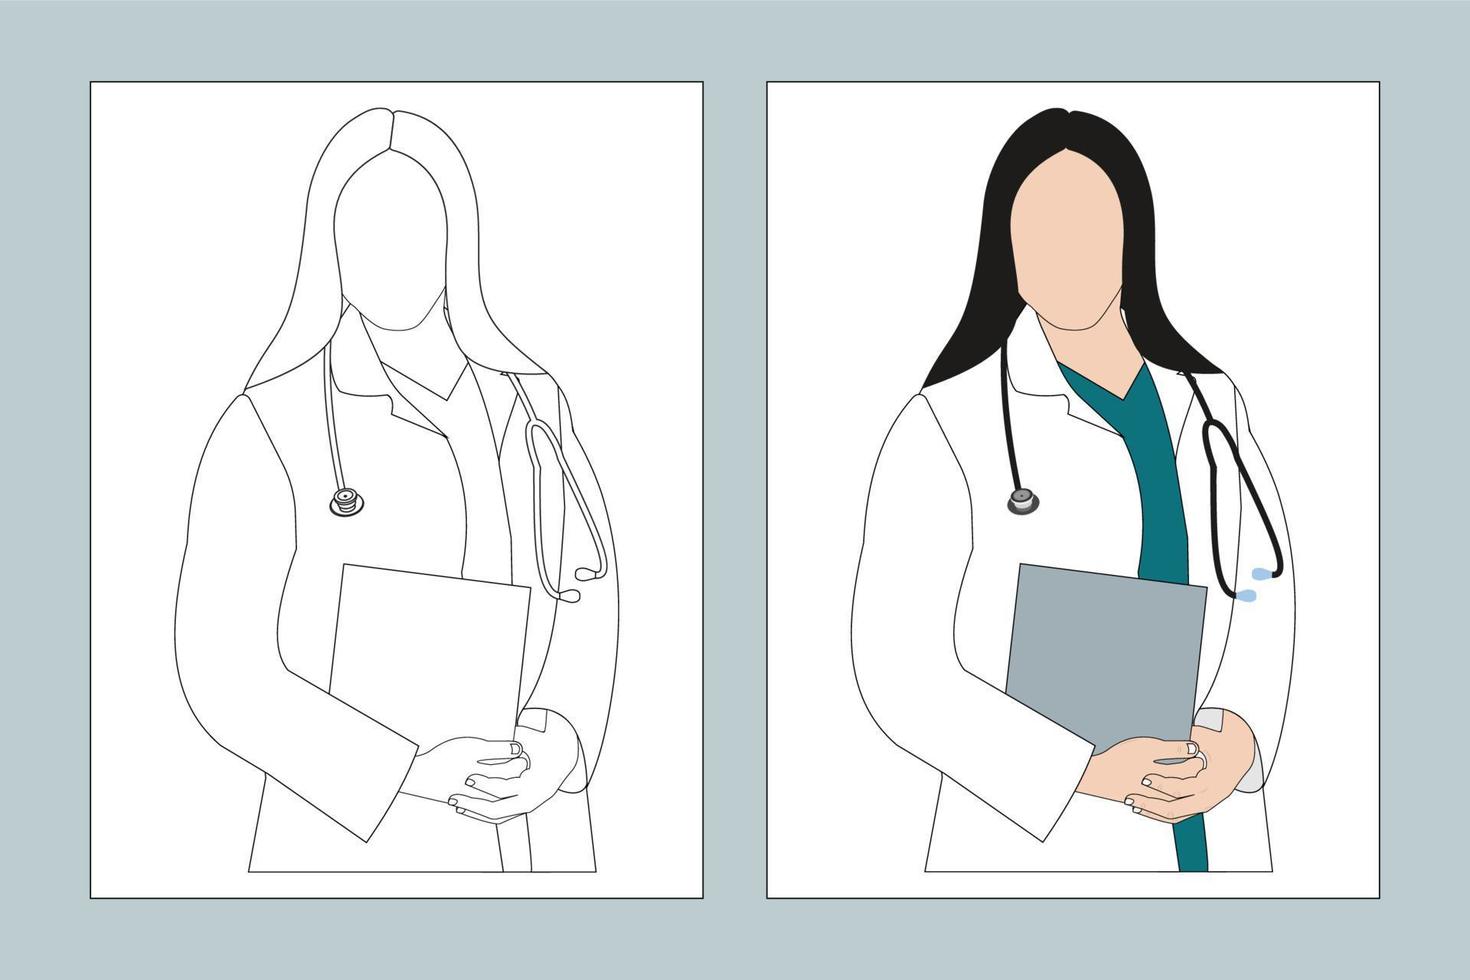 Female doctor coloring page. Doctor coloring page line art. Female nurse line art. Medical doctor line art vector. Stethoscope vector. Coloring page SVG cut file. Woman doctor flat design. vector